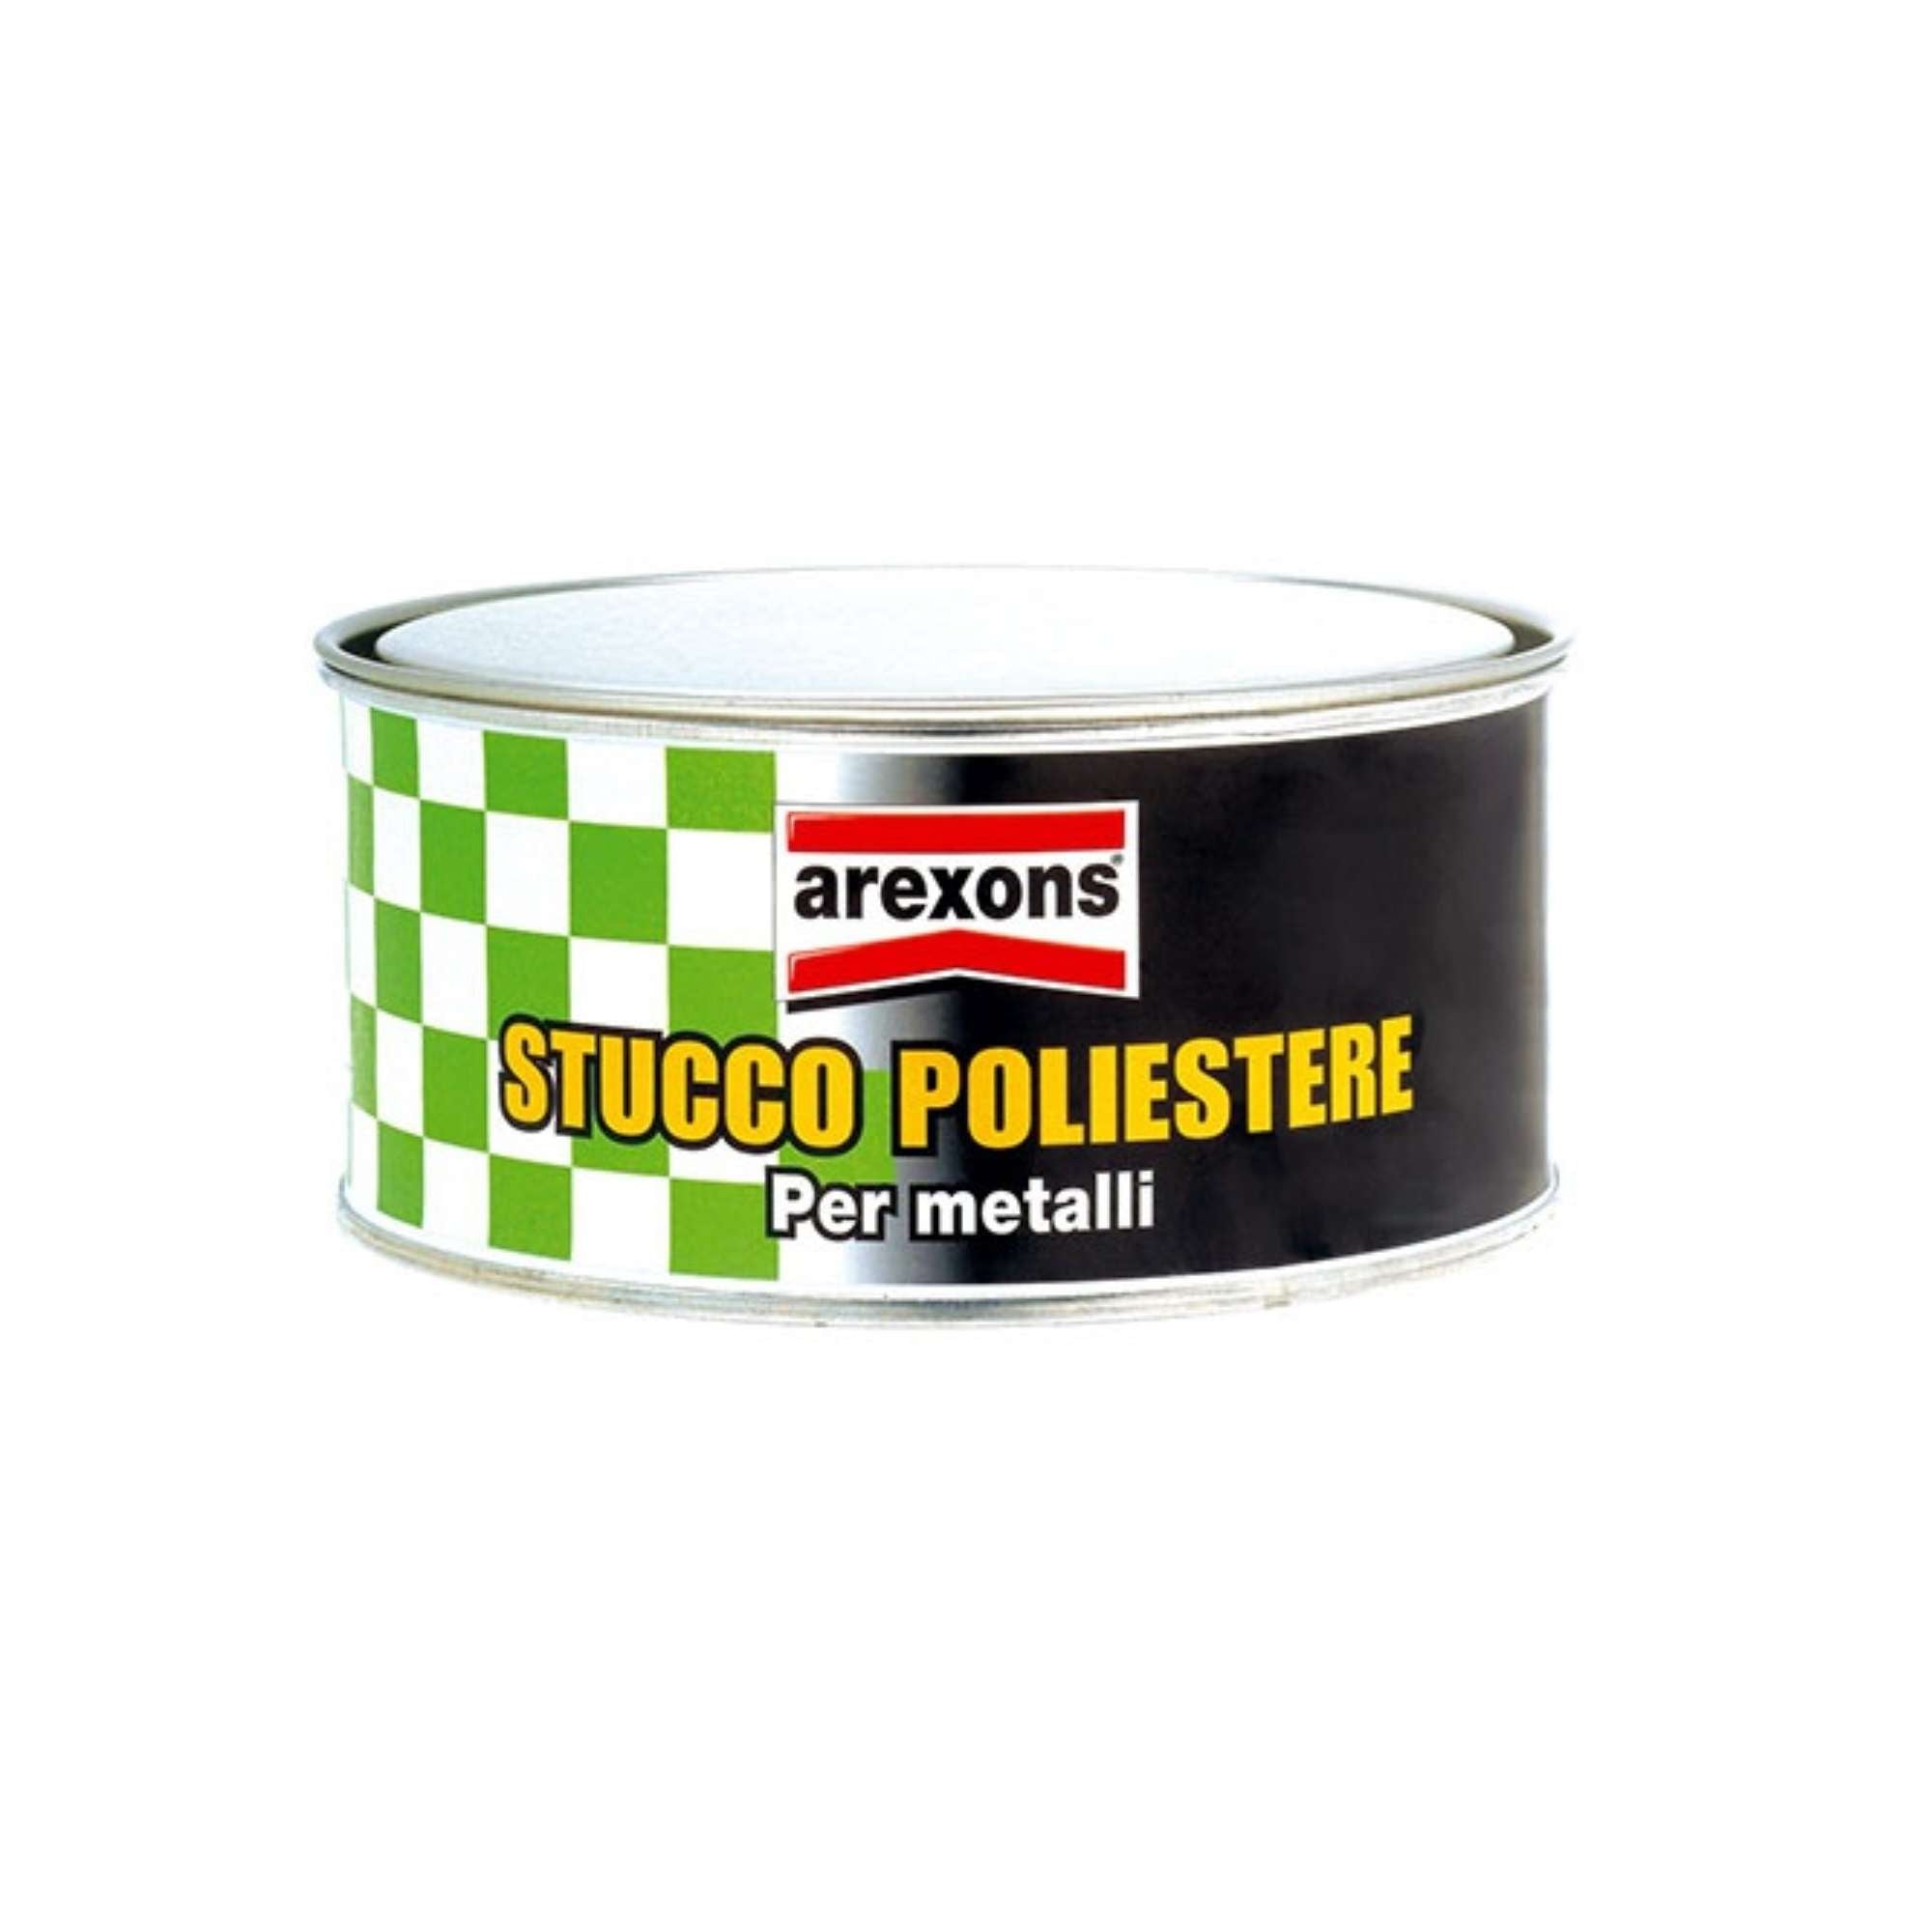 Polyester putty for metals - Arexons